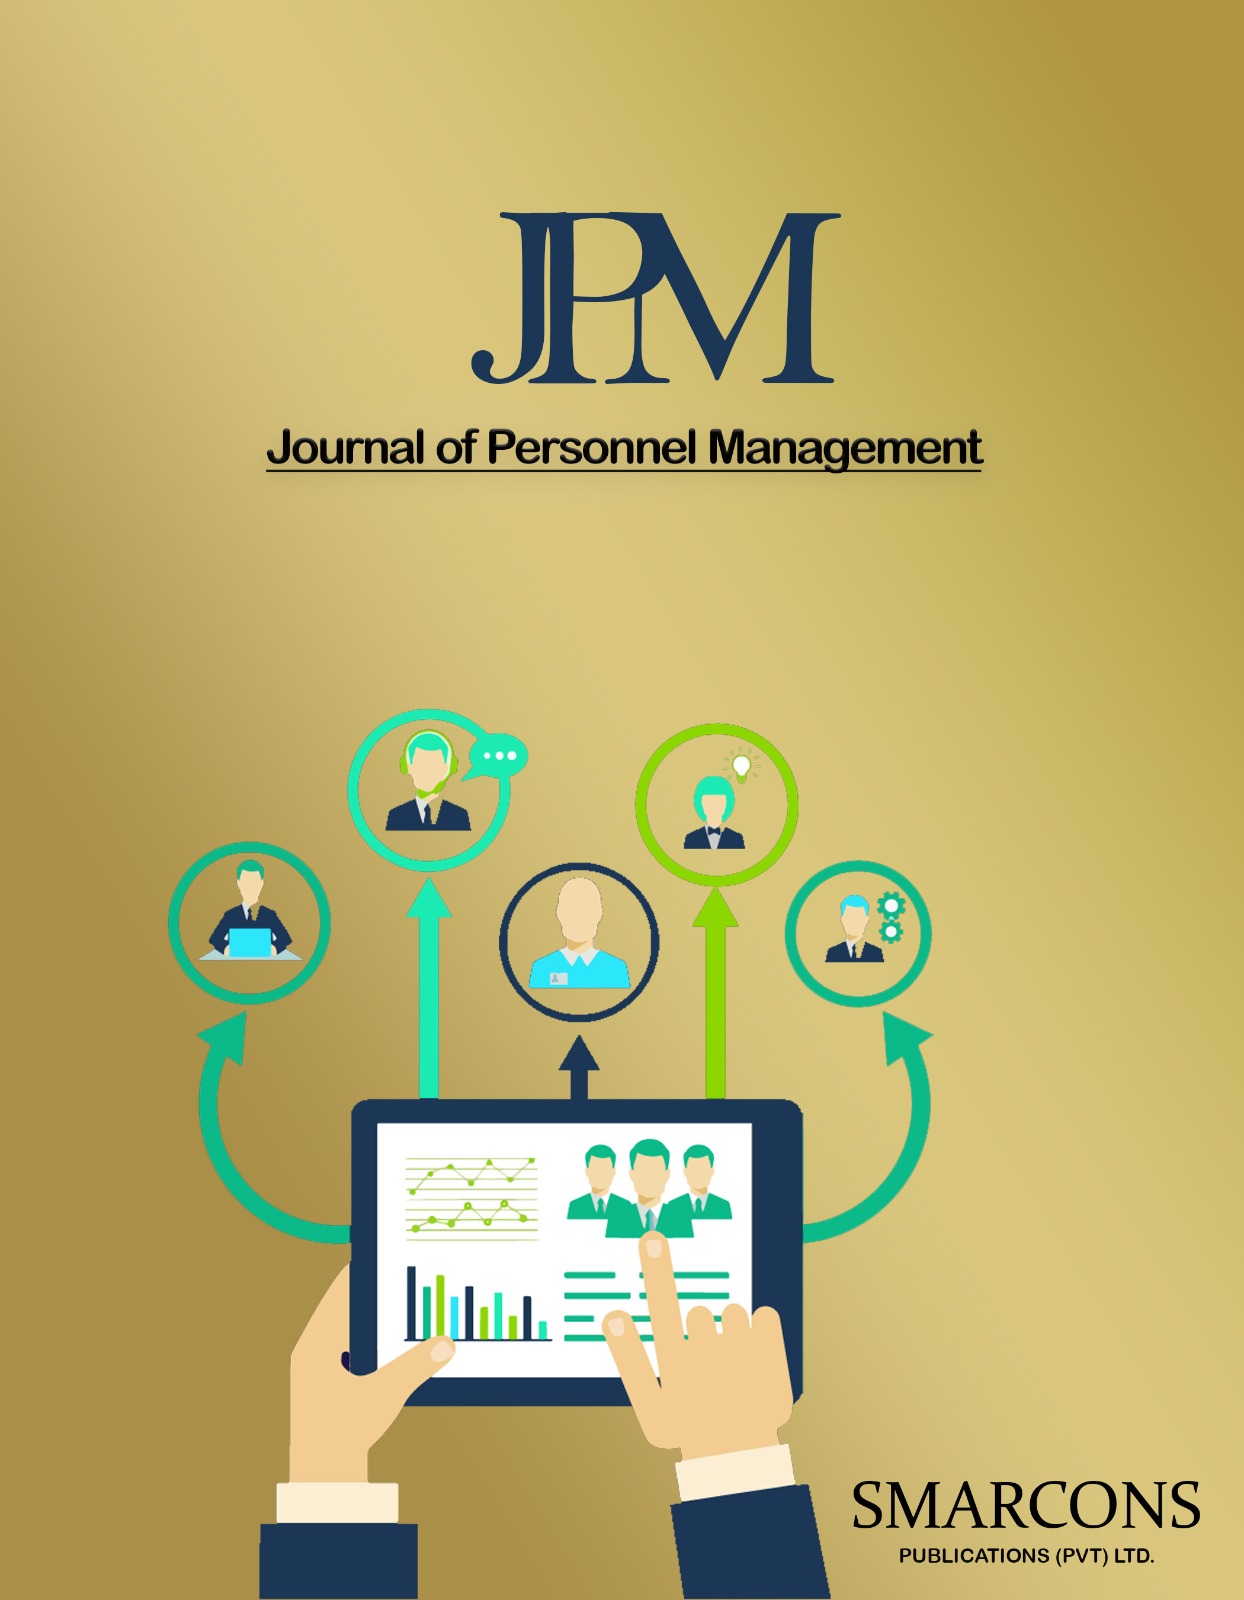 Published biannually with a rigorous double-blind review process, The Journal of Personnel Management is a scholarly periodical committed to pushing the boundaries of knowledge in human resource management, leadership, and organizational behavior. It serves as a dedicated platform for researchers, practitioners, and academicians to share their original research, insights, and expertise in these pivotal areas. By fostering the exchange of ideas, the journal seeks to not only contribute to the existing body of knowledge but also deepen our comprehension of personnel management in the ever-evolving context of contemporary organizations.